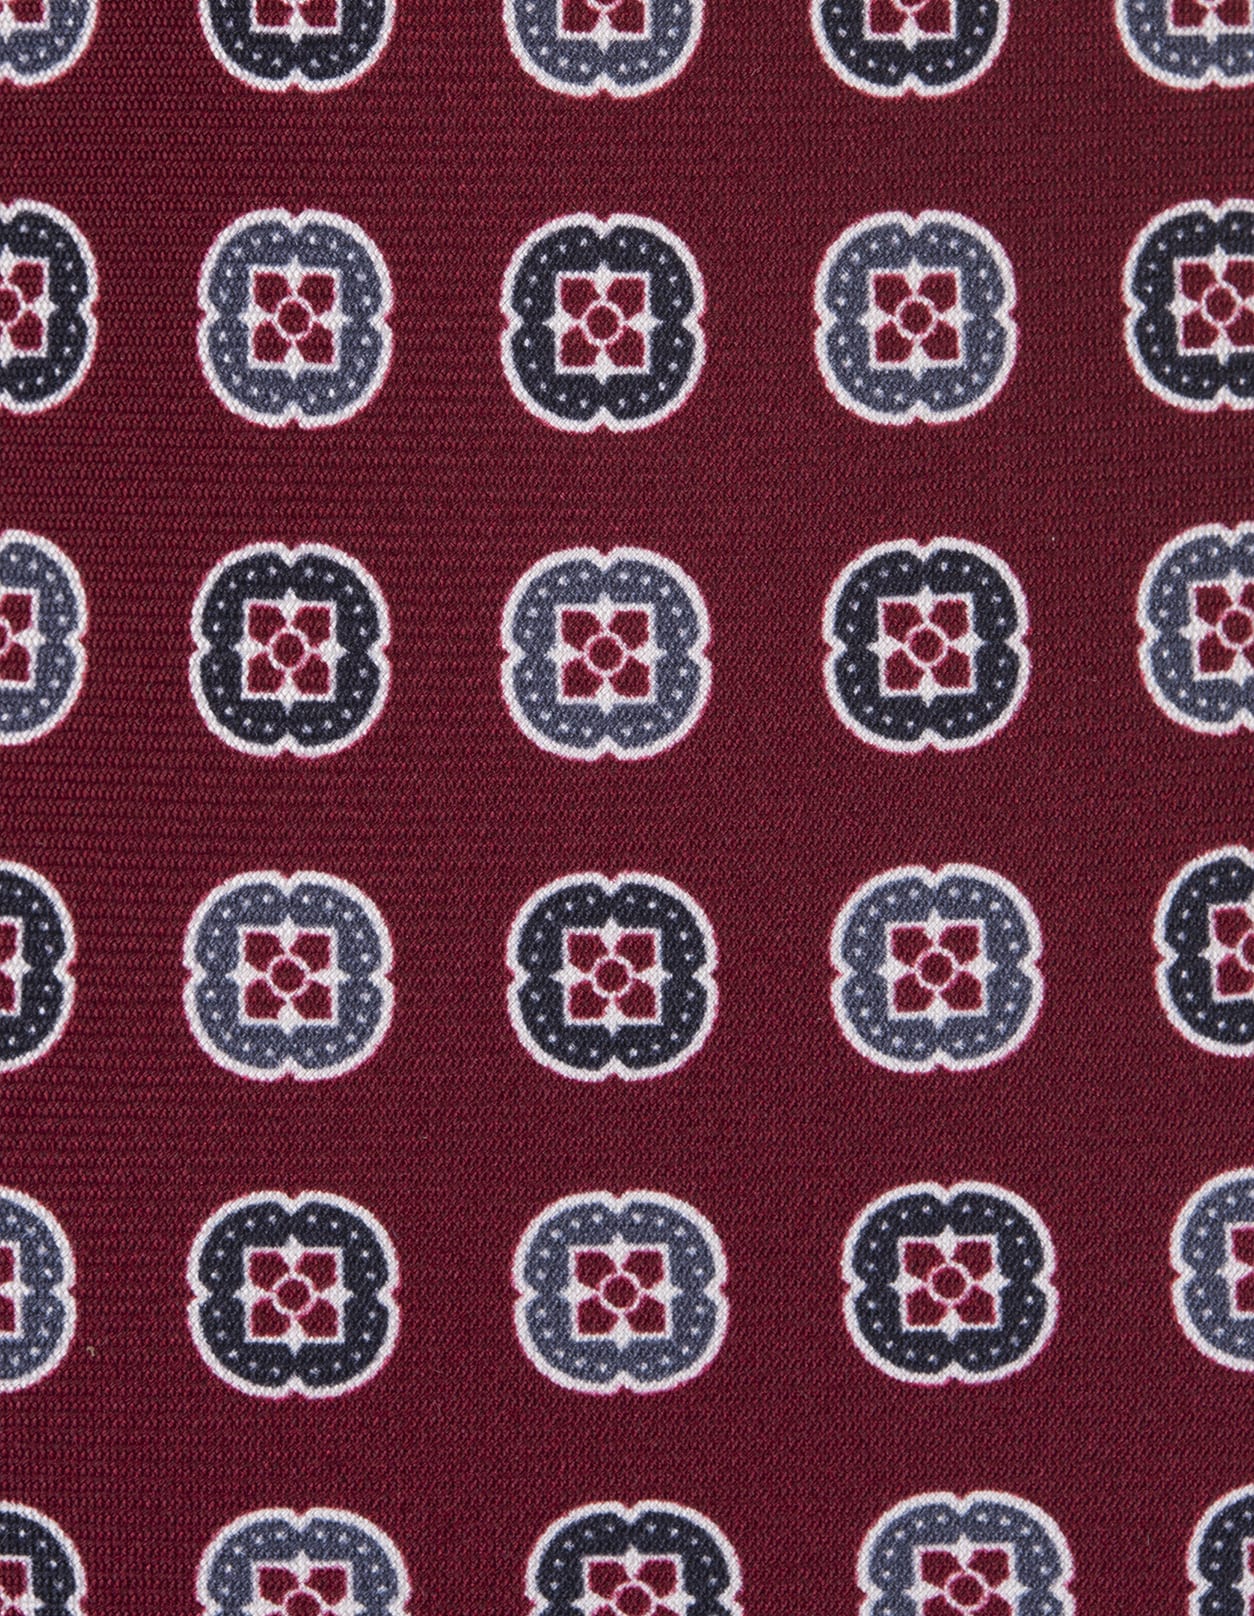 Shop Kiton Burgundy Tie With Pattern In Red